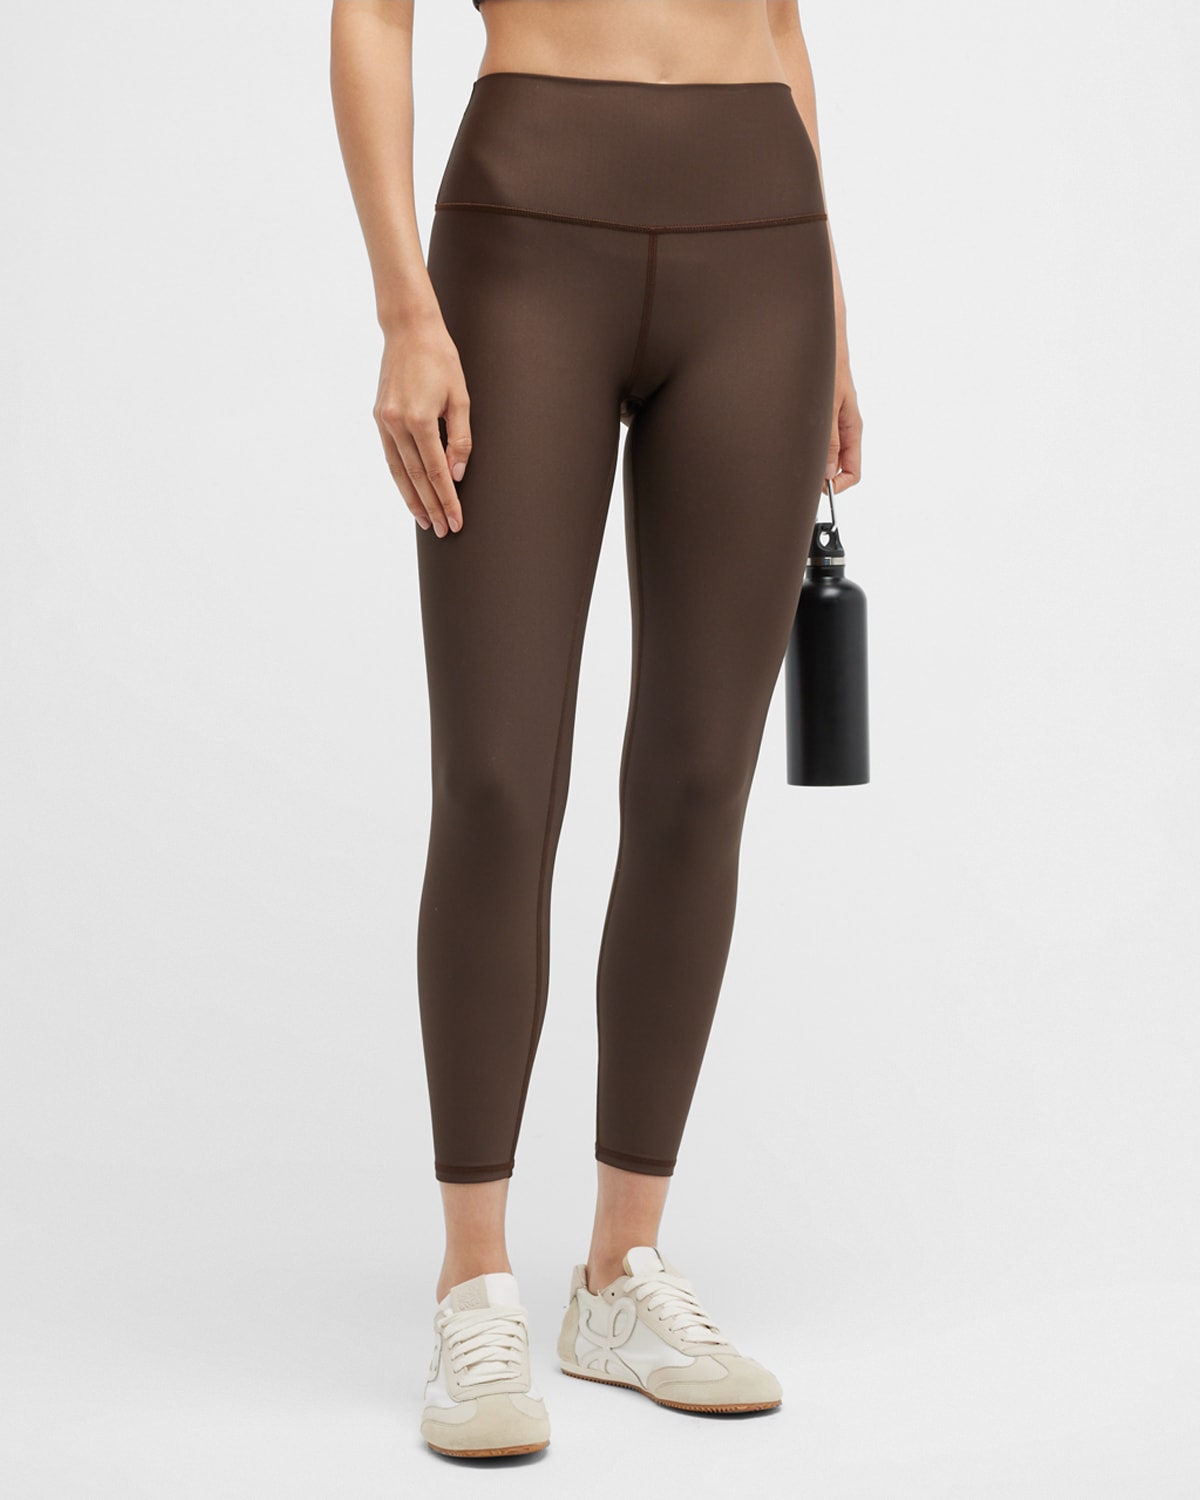 7/8 High-Waist Airlift Legging in Rust by Alo Yoga - Work Well Daily